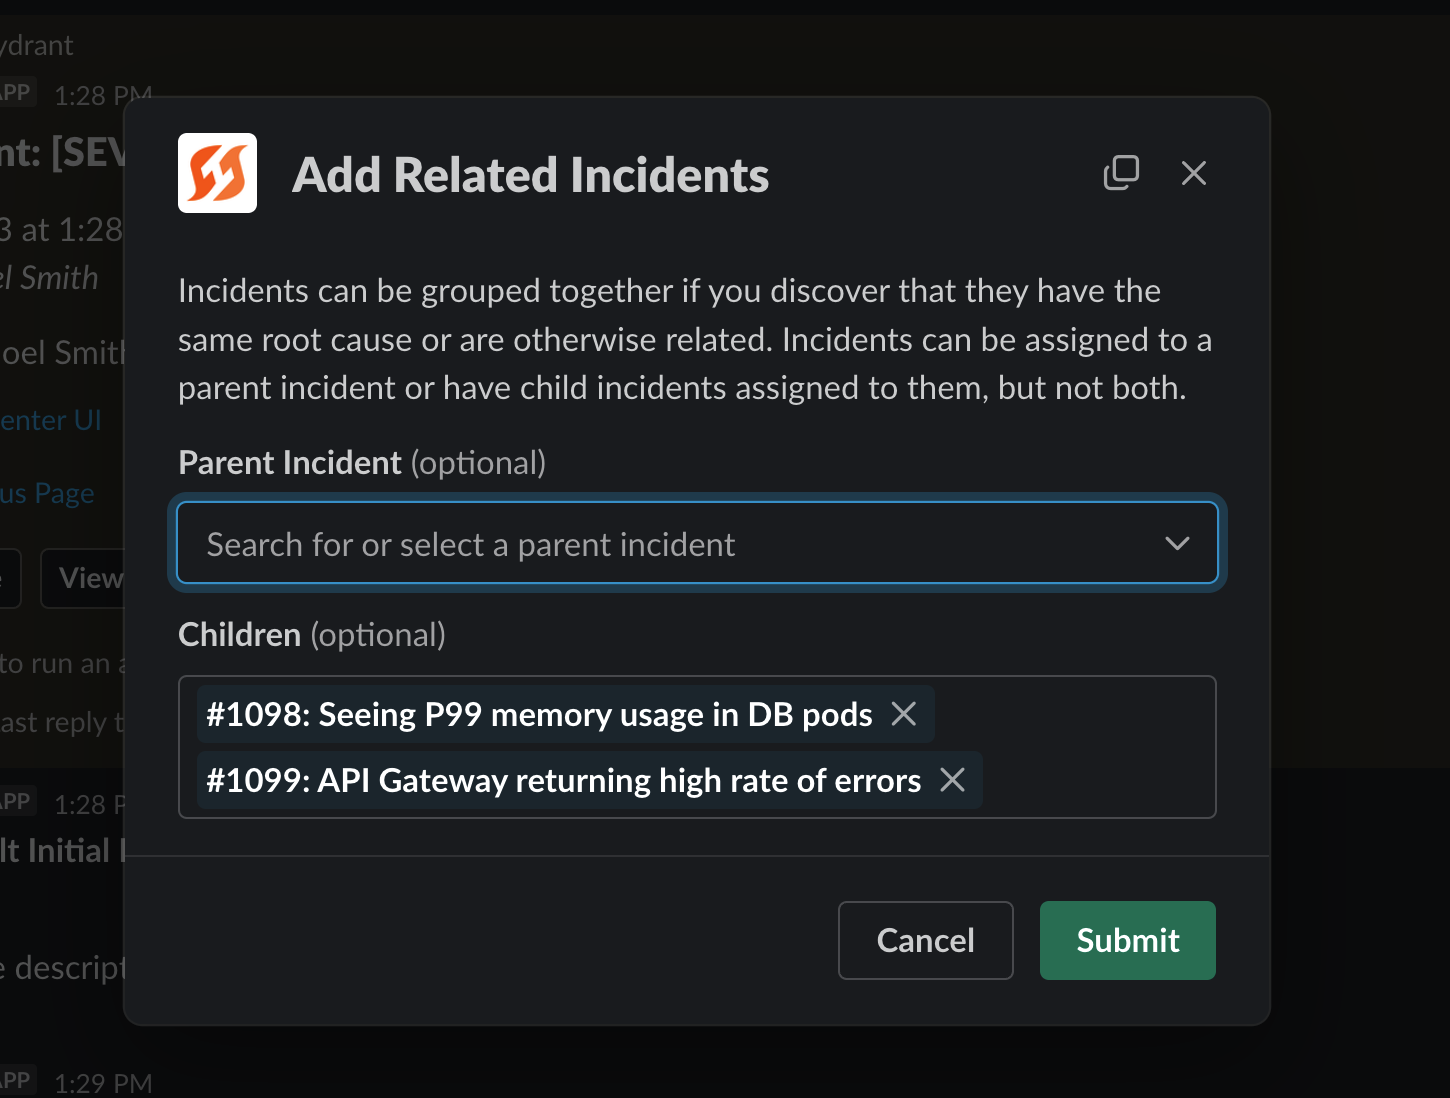 Related incidents modal in Slack